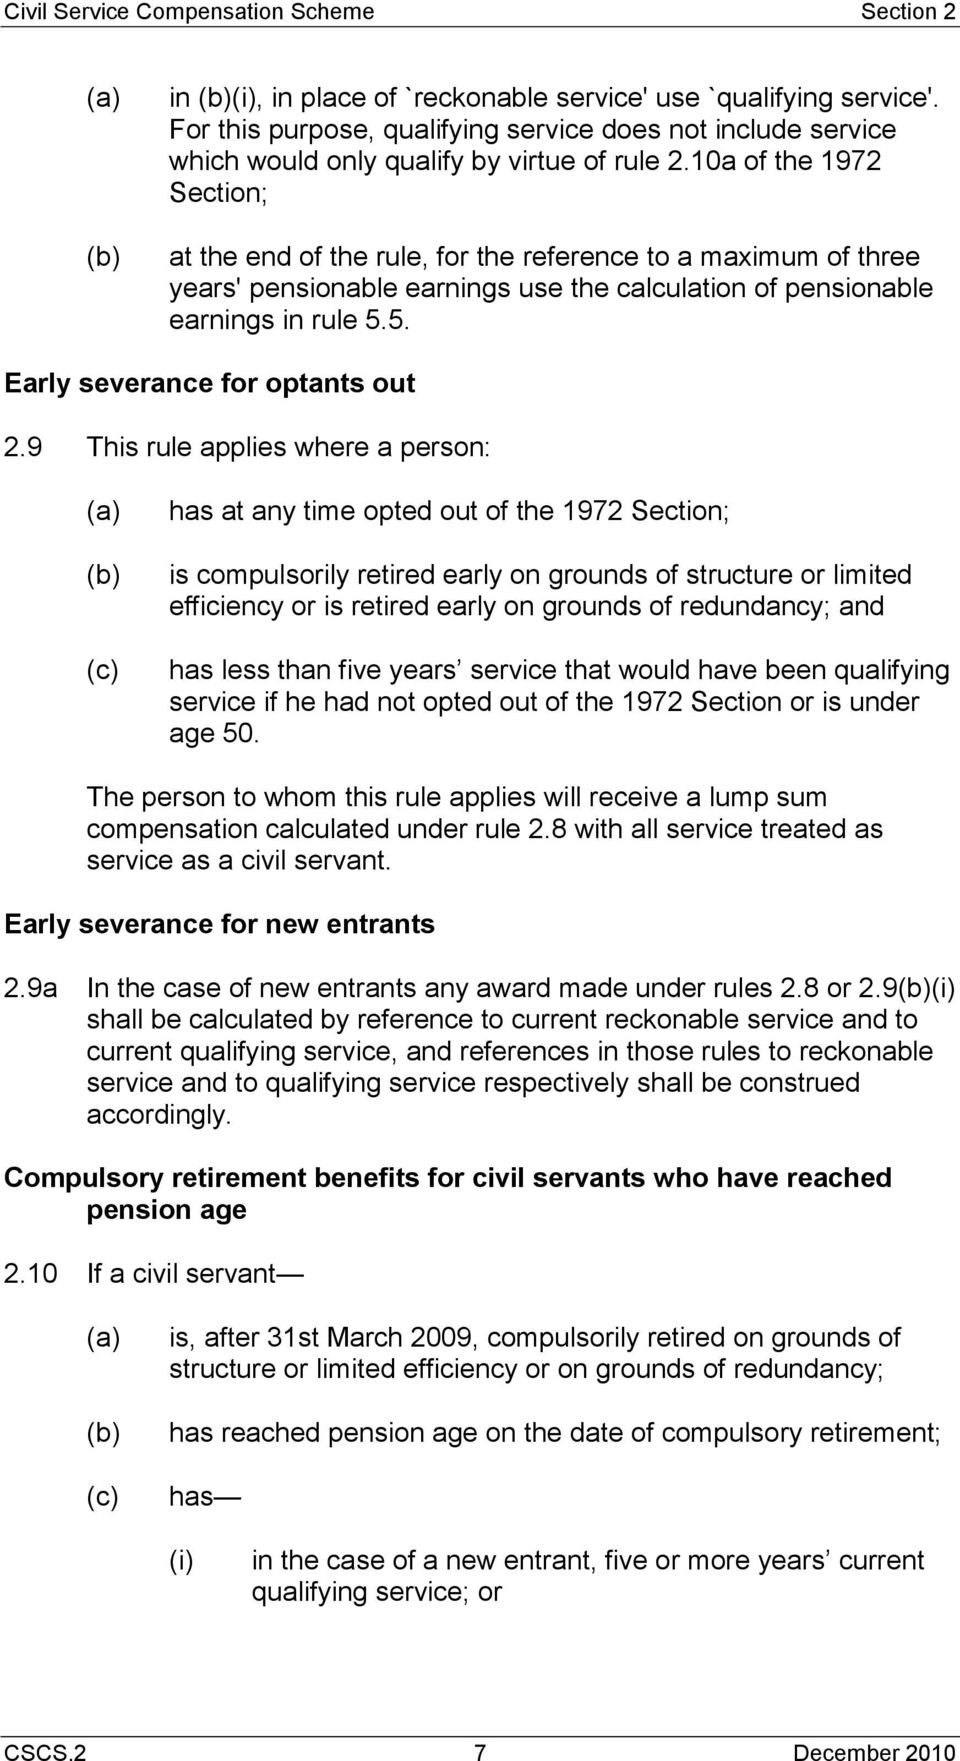 10a of the 1972 Section; at the end of the rule, for the reference to a maximum of three years' pensionable earnings use the calculation of pensionable earnings in rule 5.